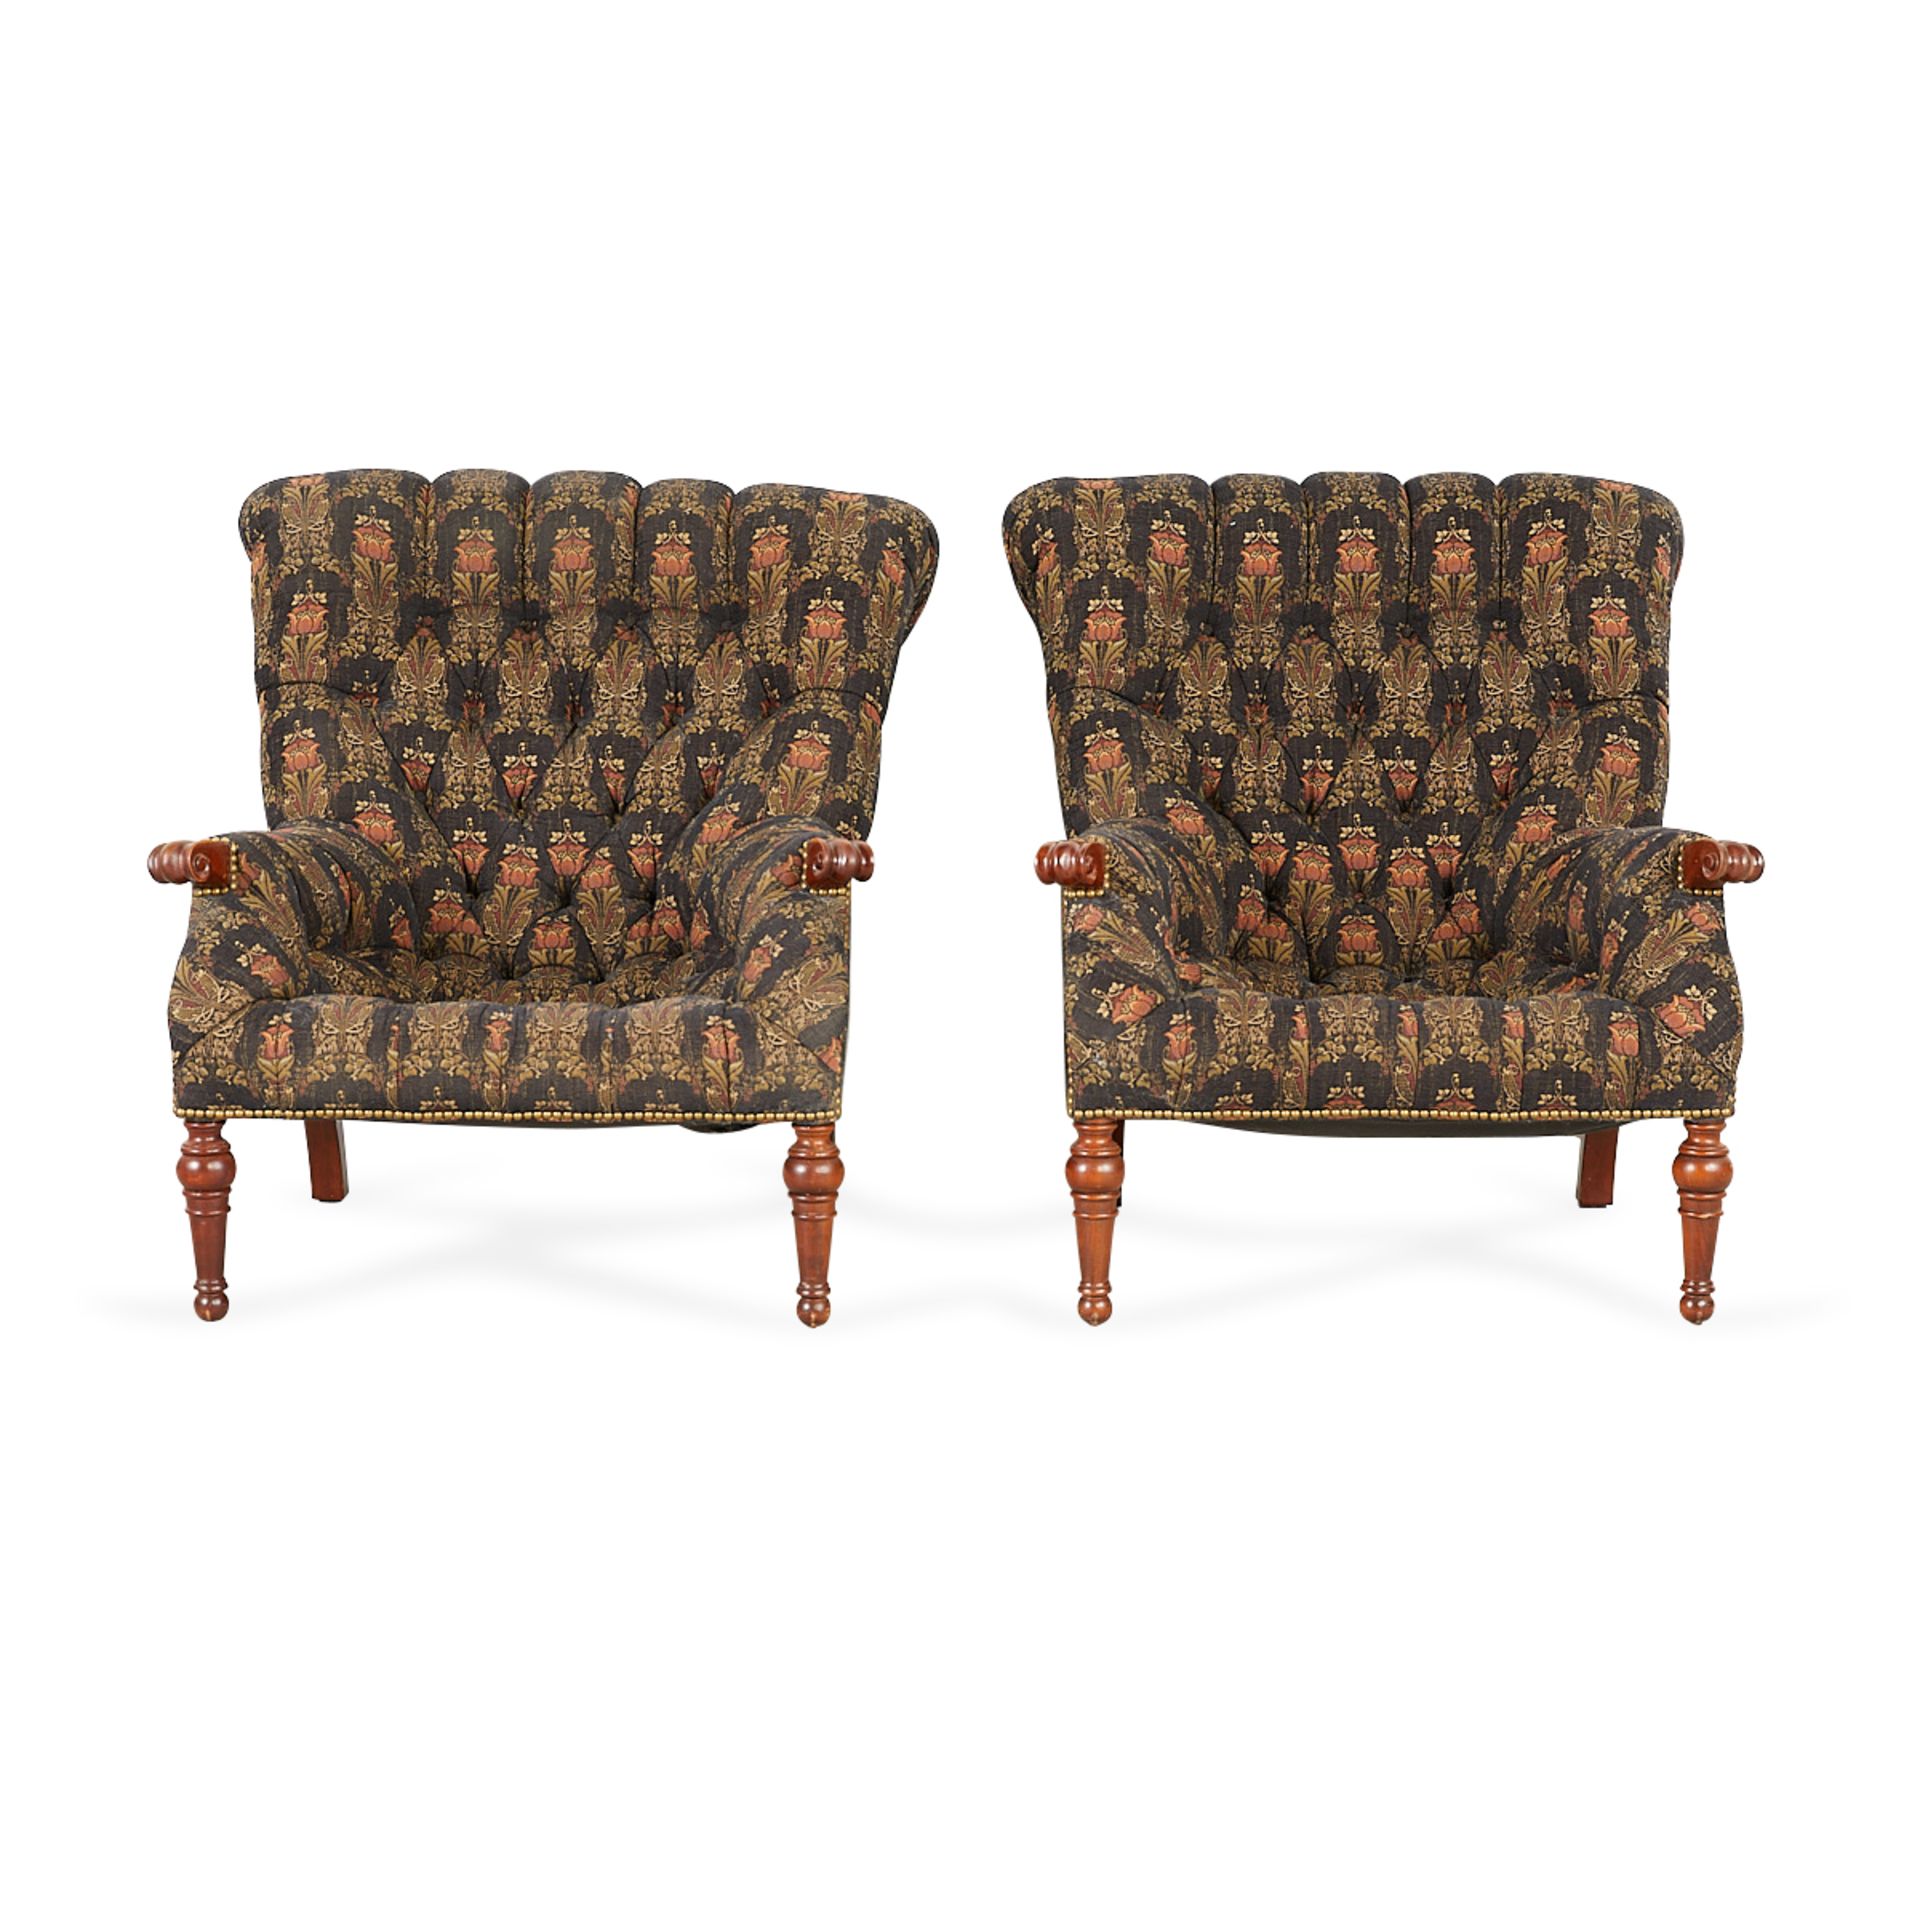 Pair of Stickley Tufted Chairs w/Ottomans - Image 3 of 22